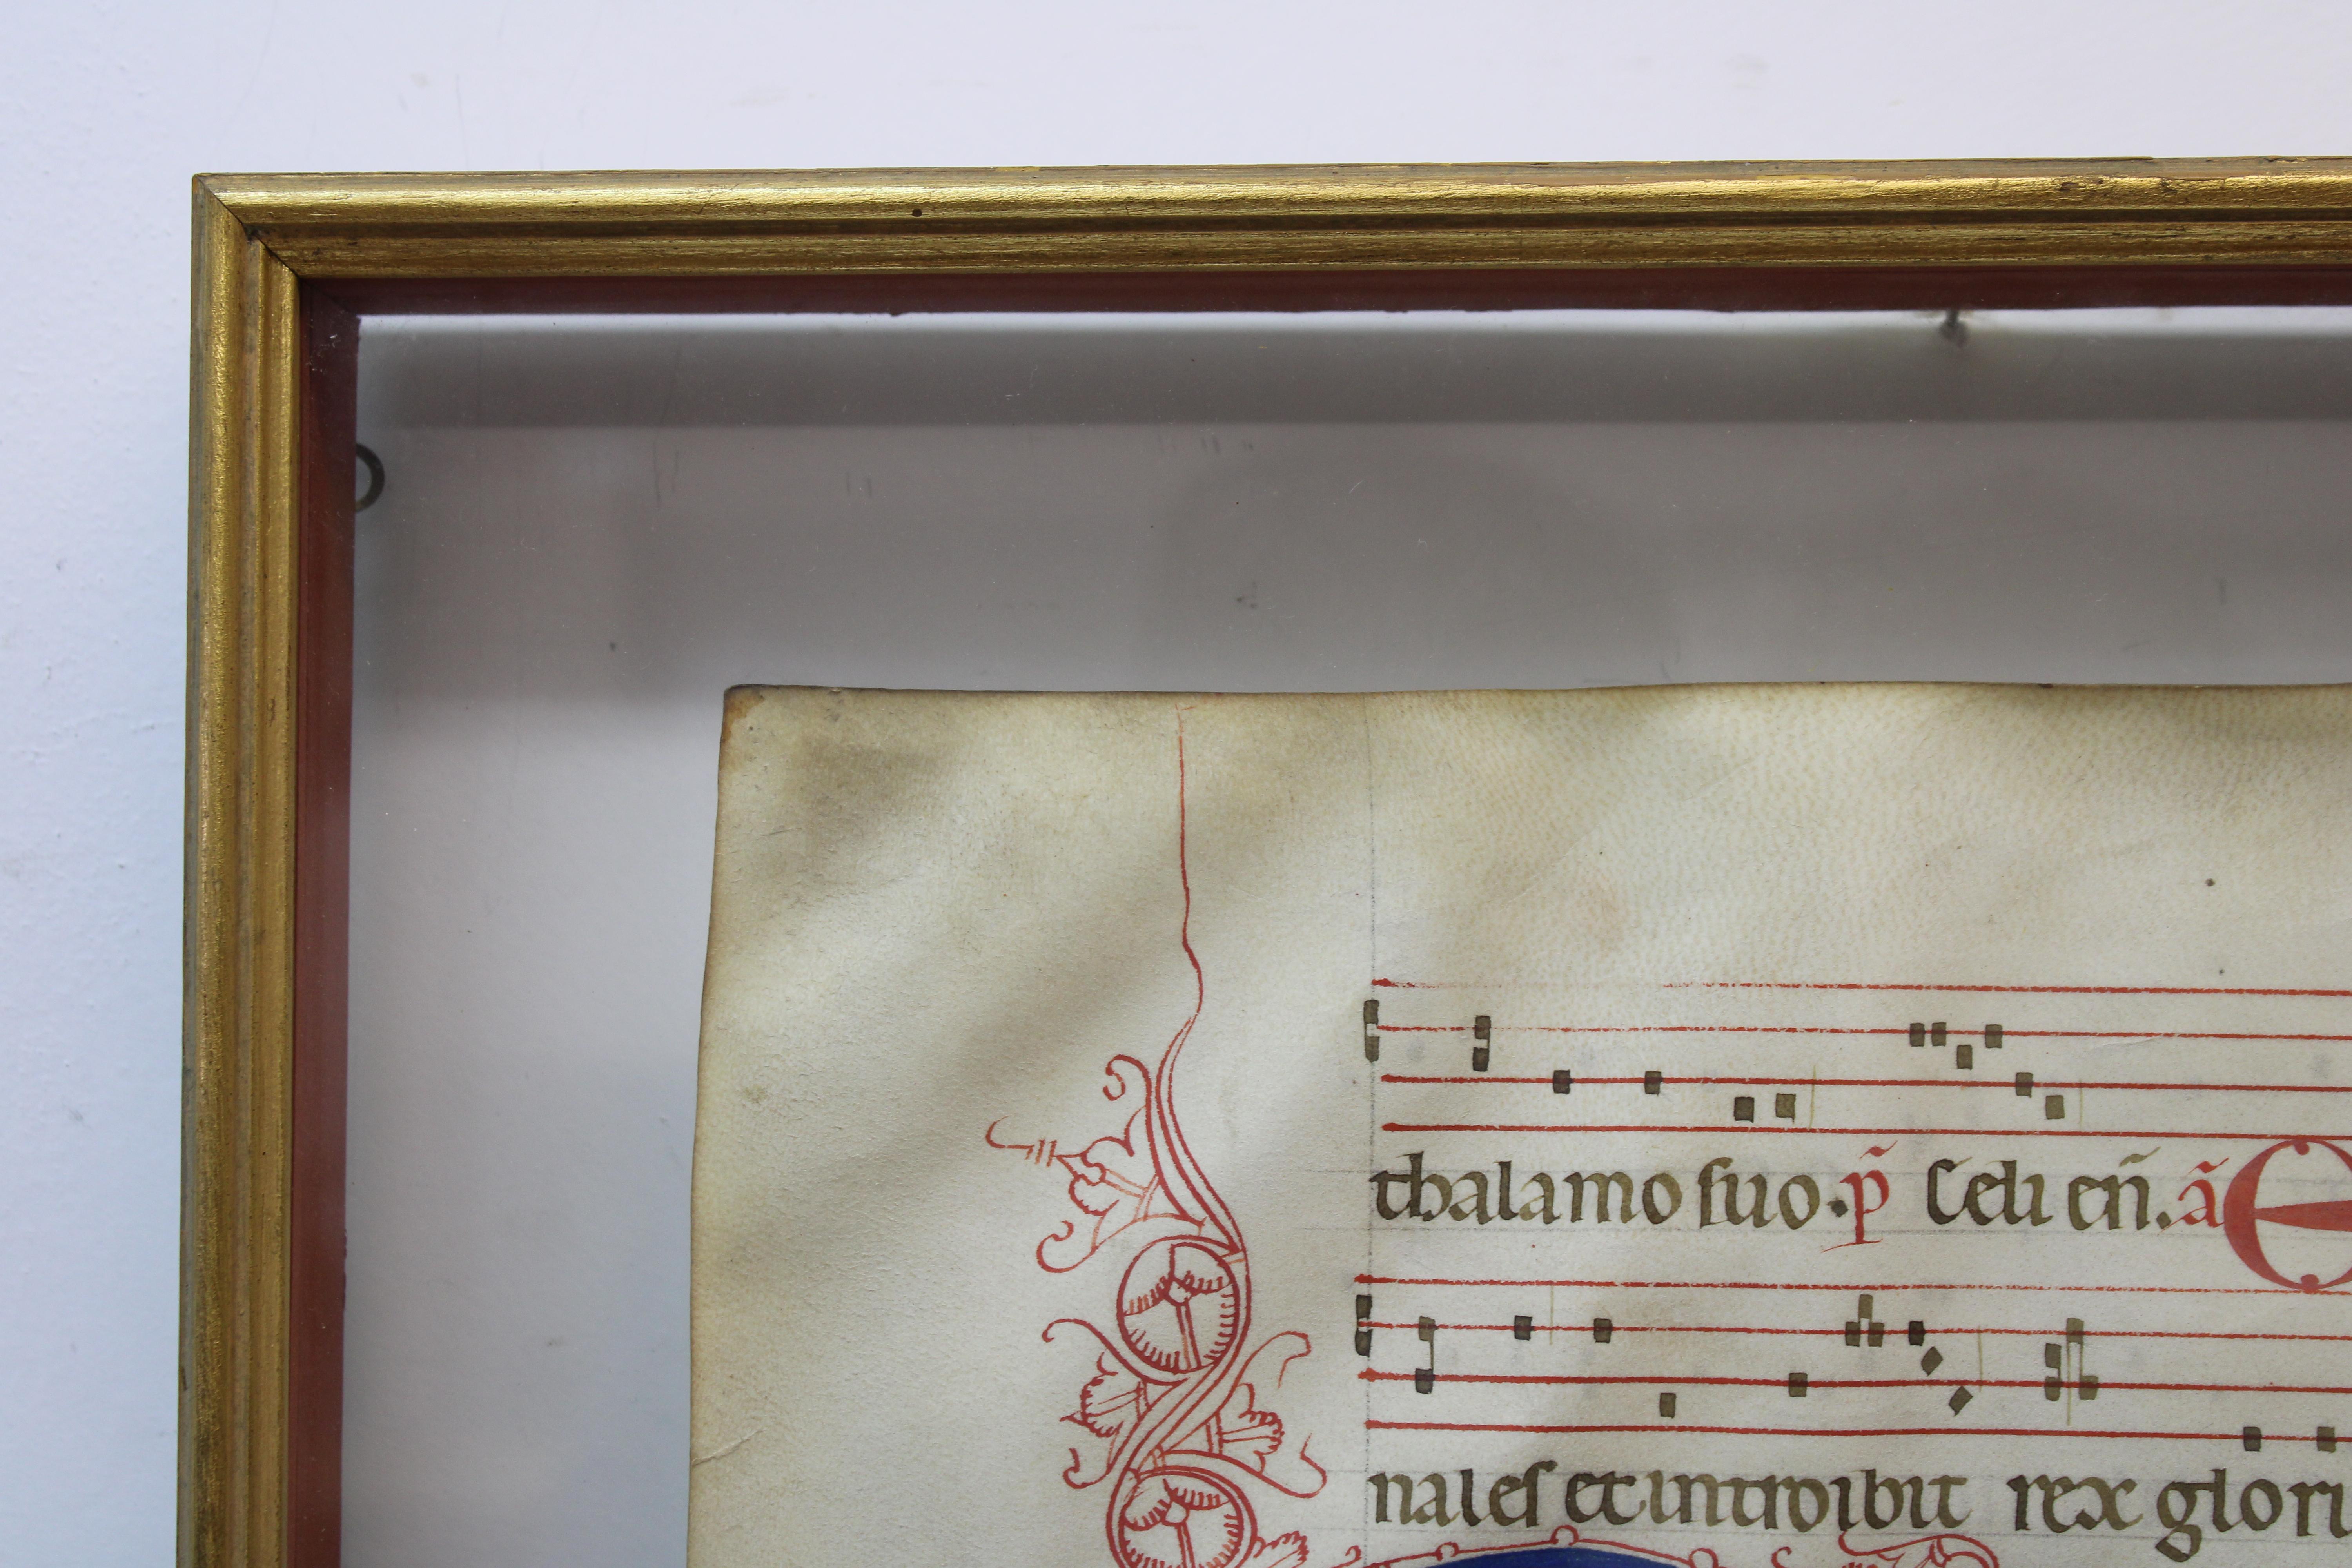 C. 18th Century

Manuscript Page of Hand painted Musical Note